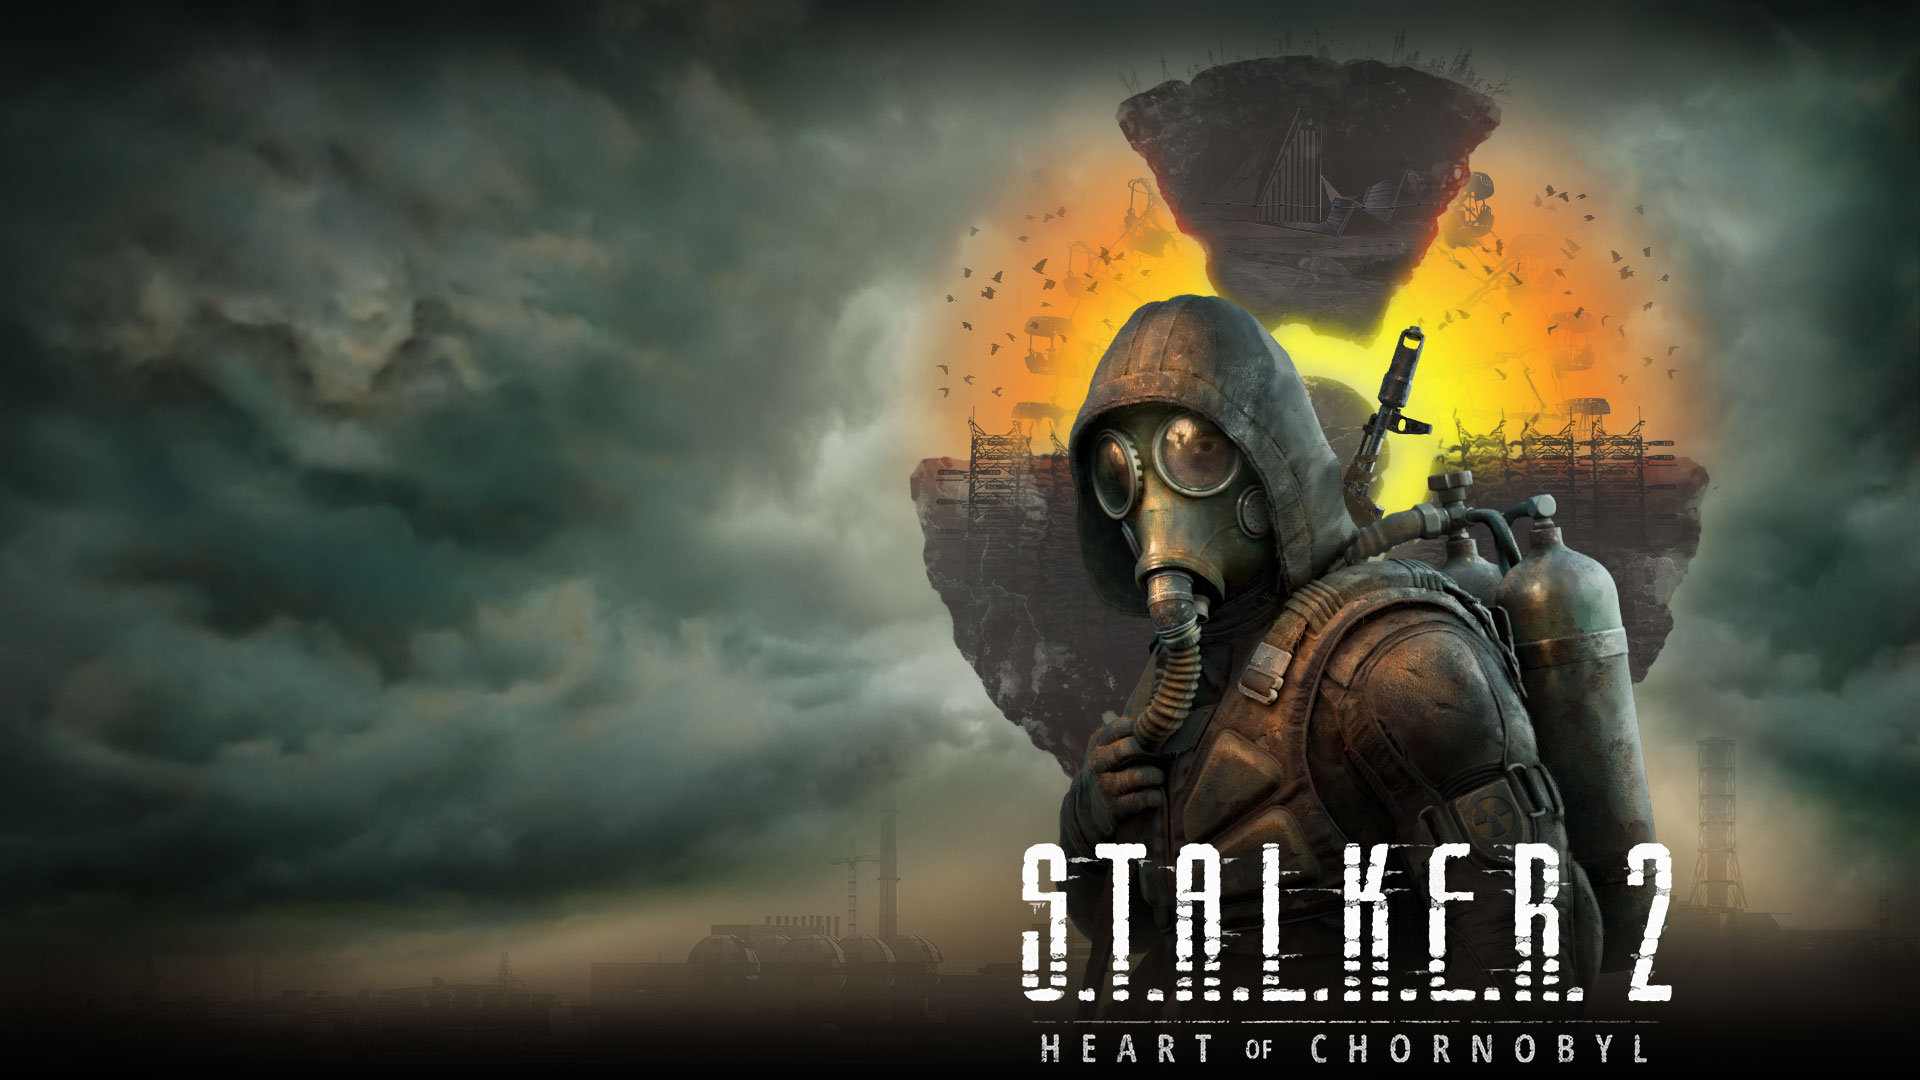 download S.T.A.L.K.E.R. 2: Heart of Chernobyl